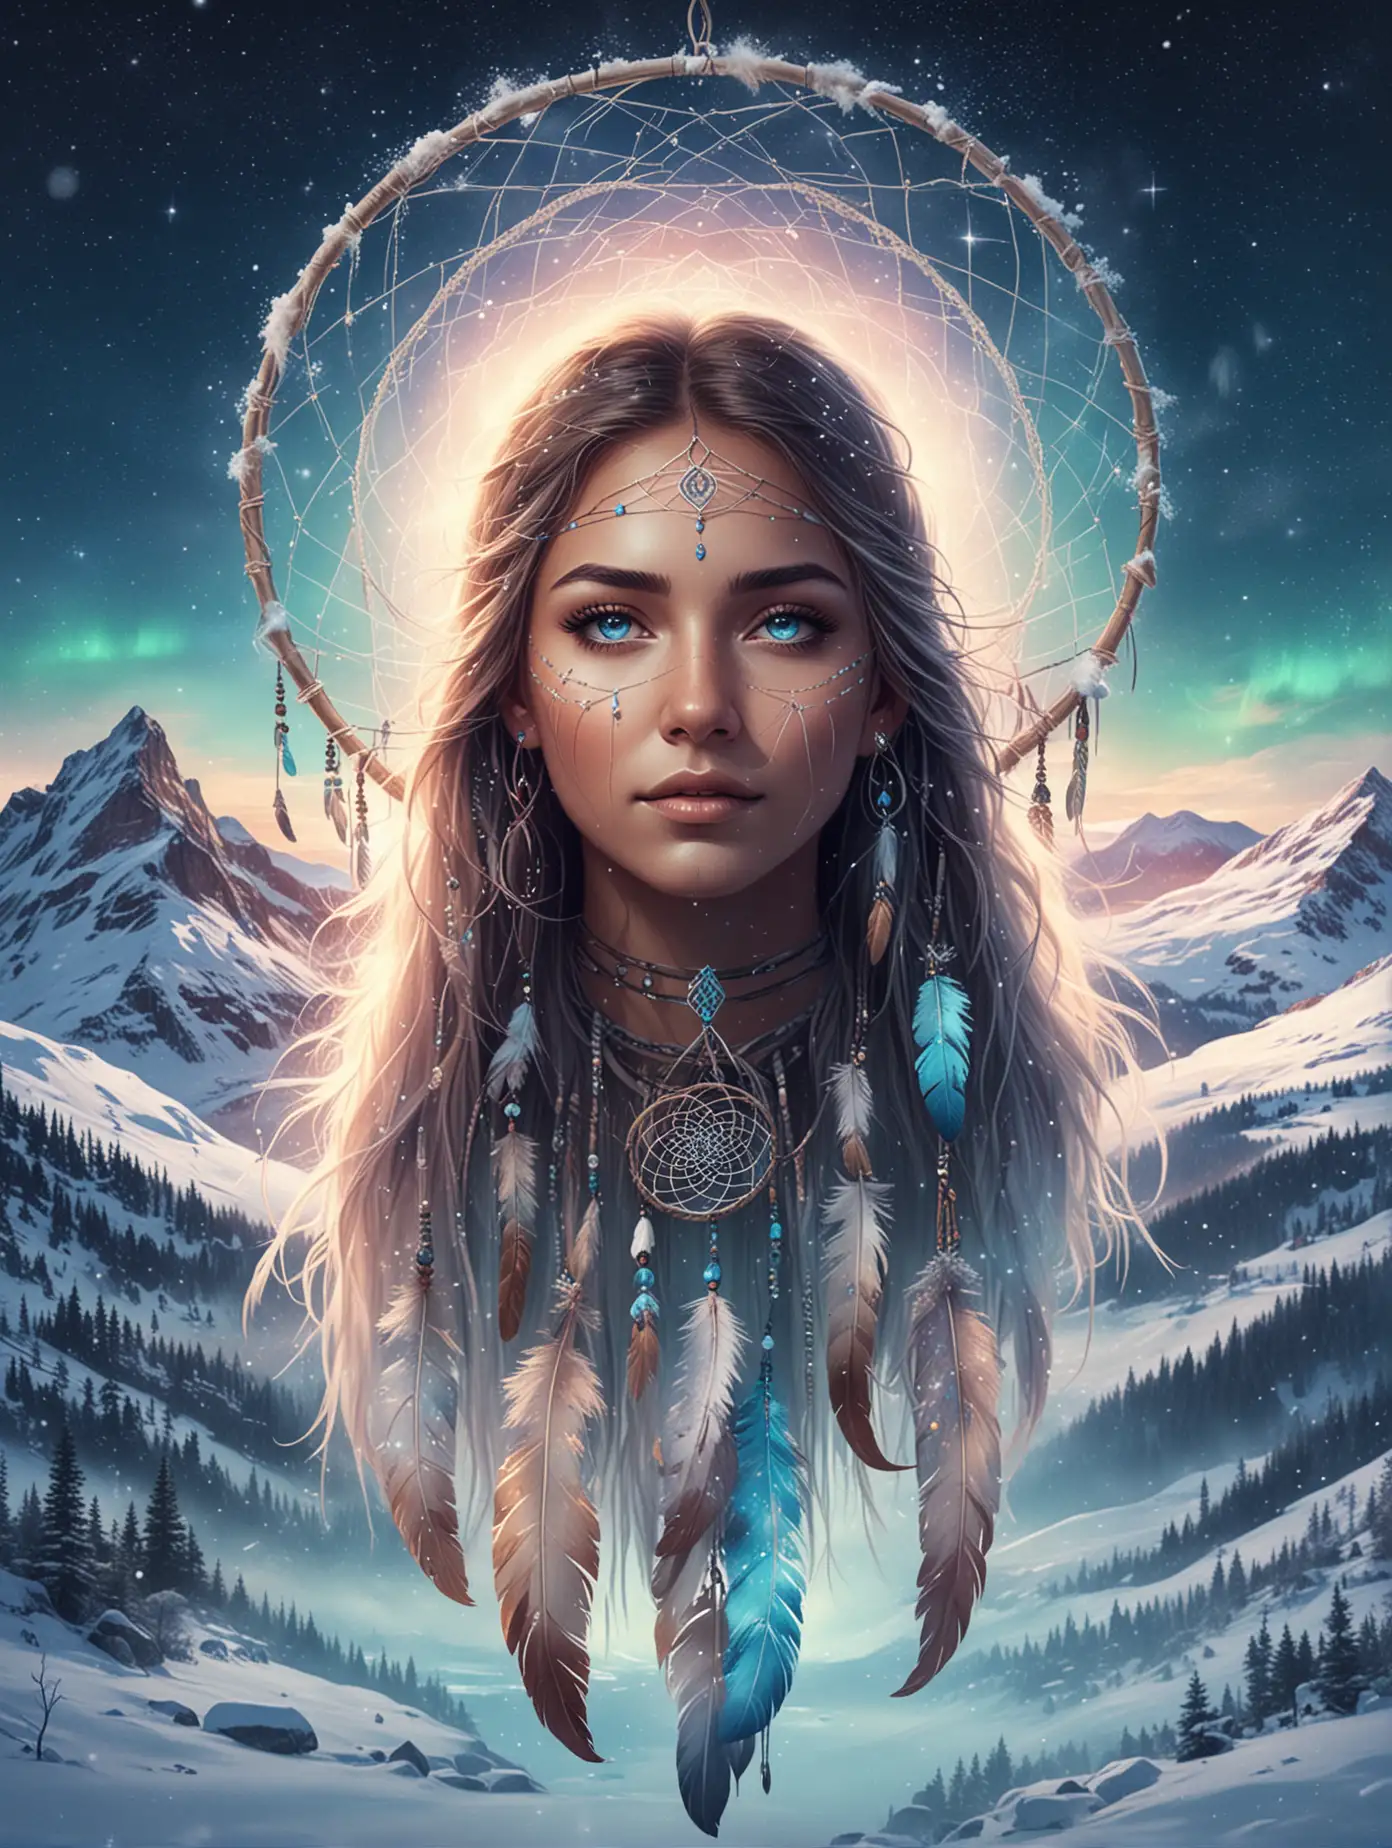 Native Woman with Dreamcatcher Against Snowy Mountain and Aurora Borealis